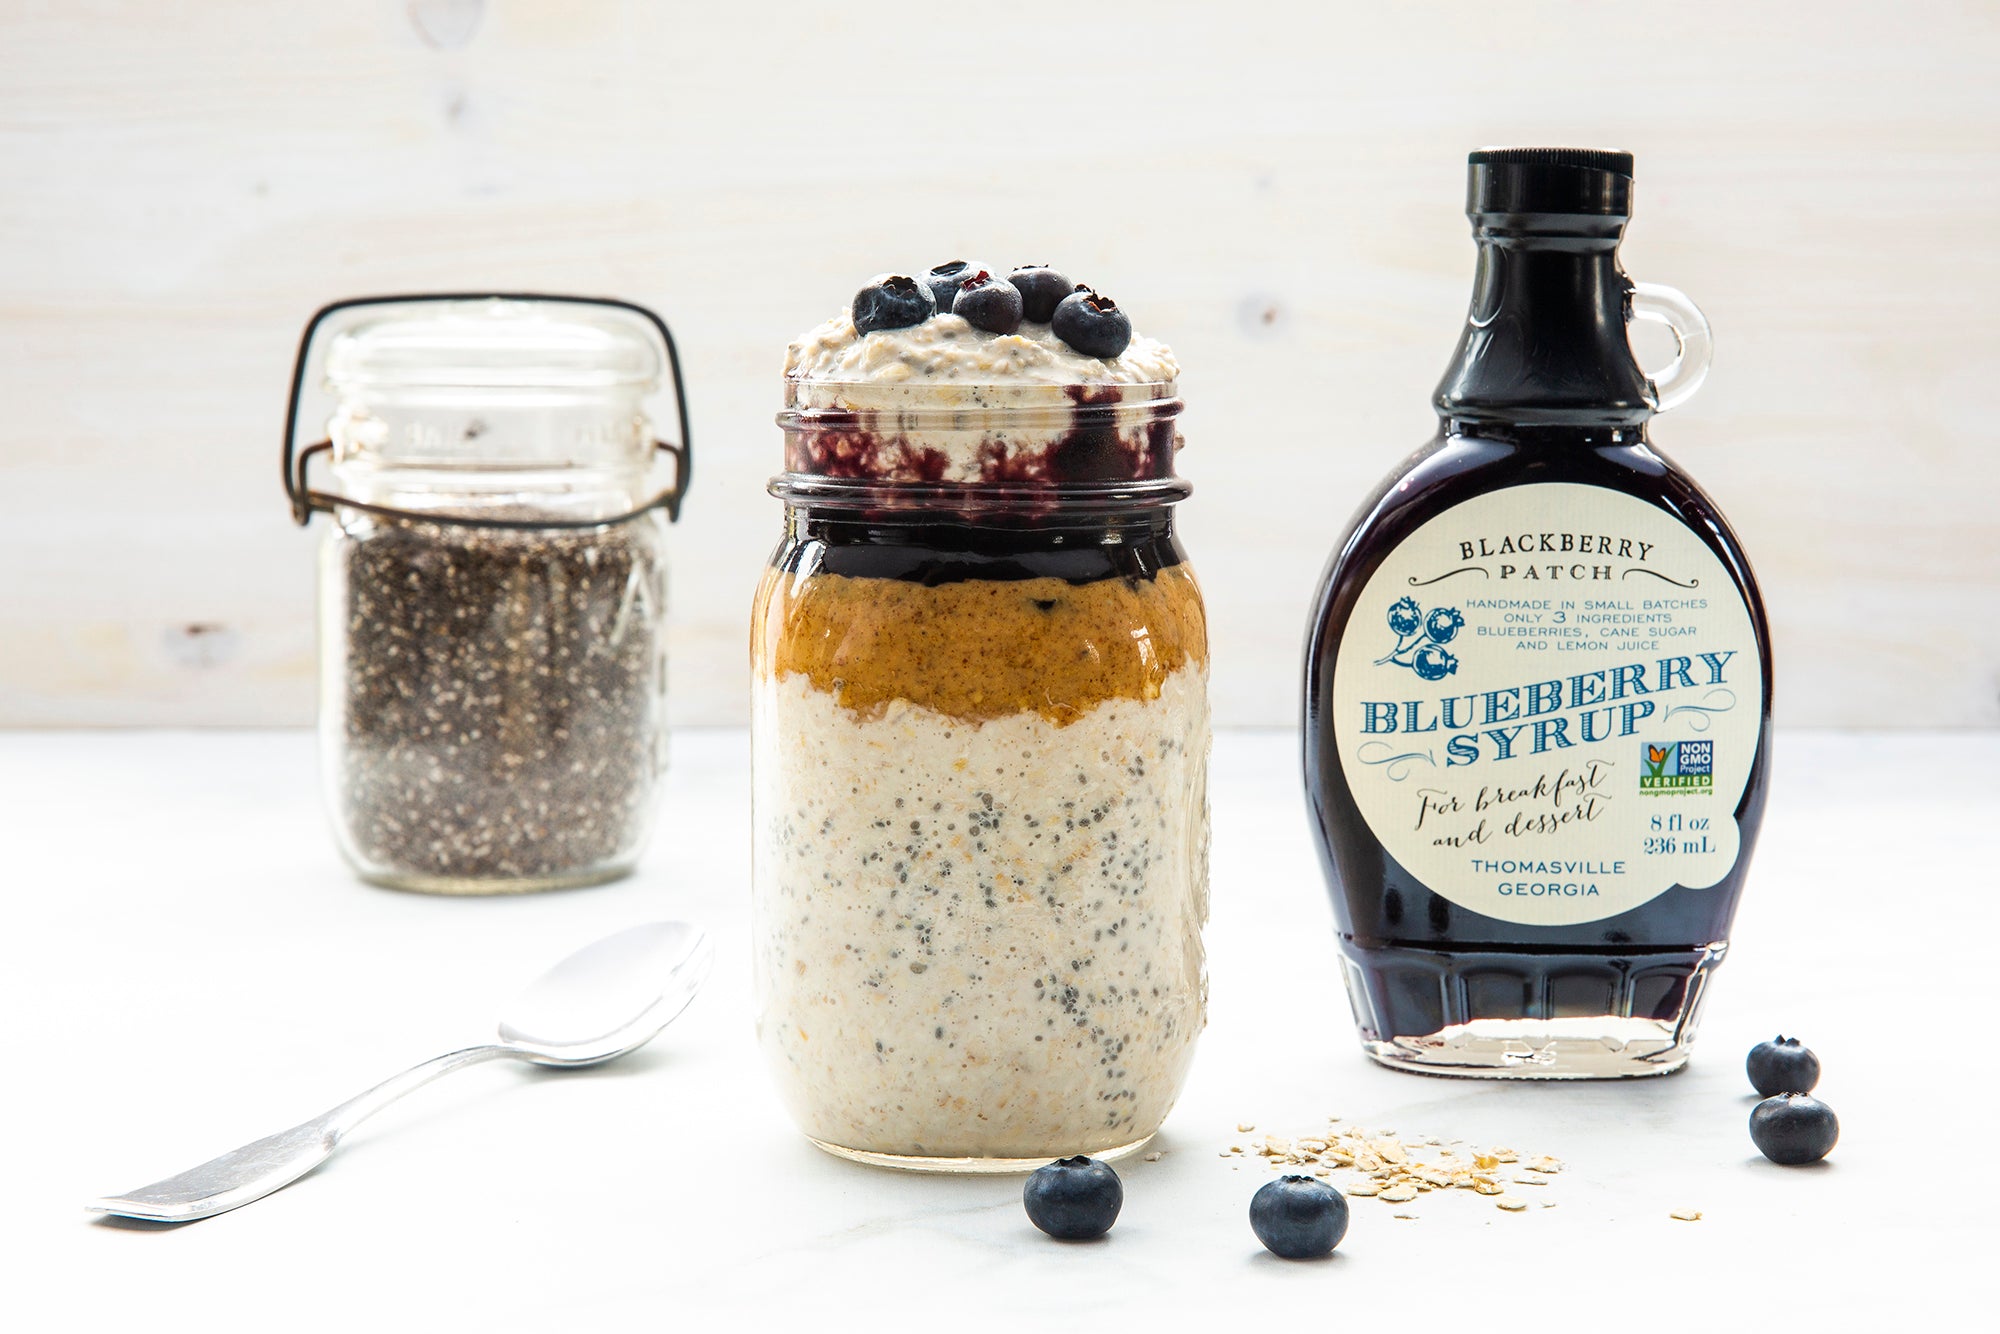 Recipe photo of Blueberry Overnight Oats using Blackberry Patch Premium Blueberry Syrup